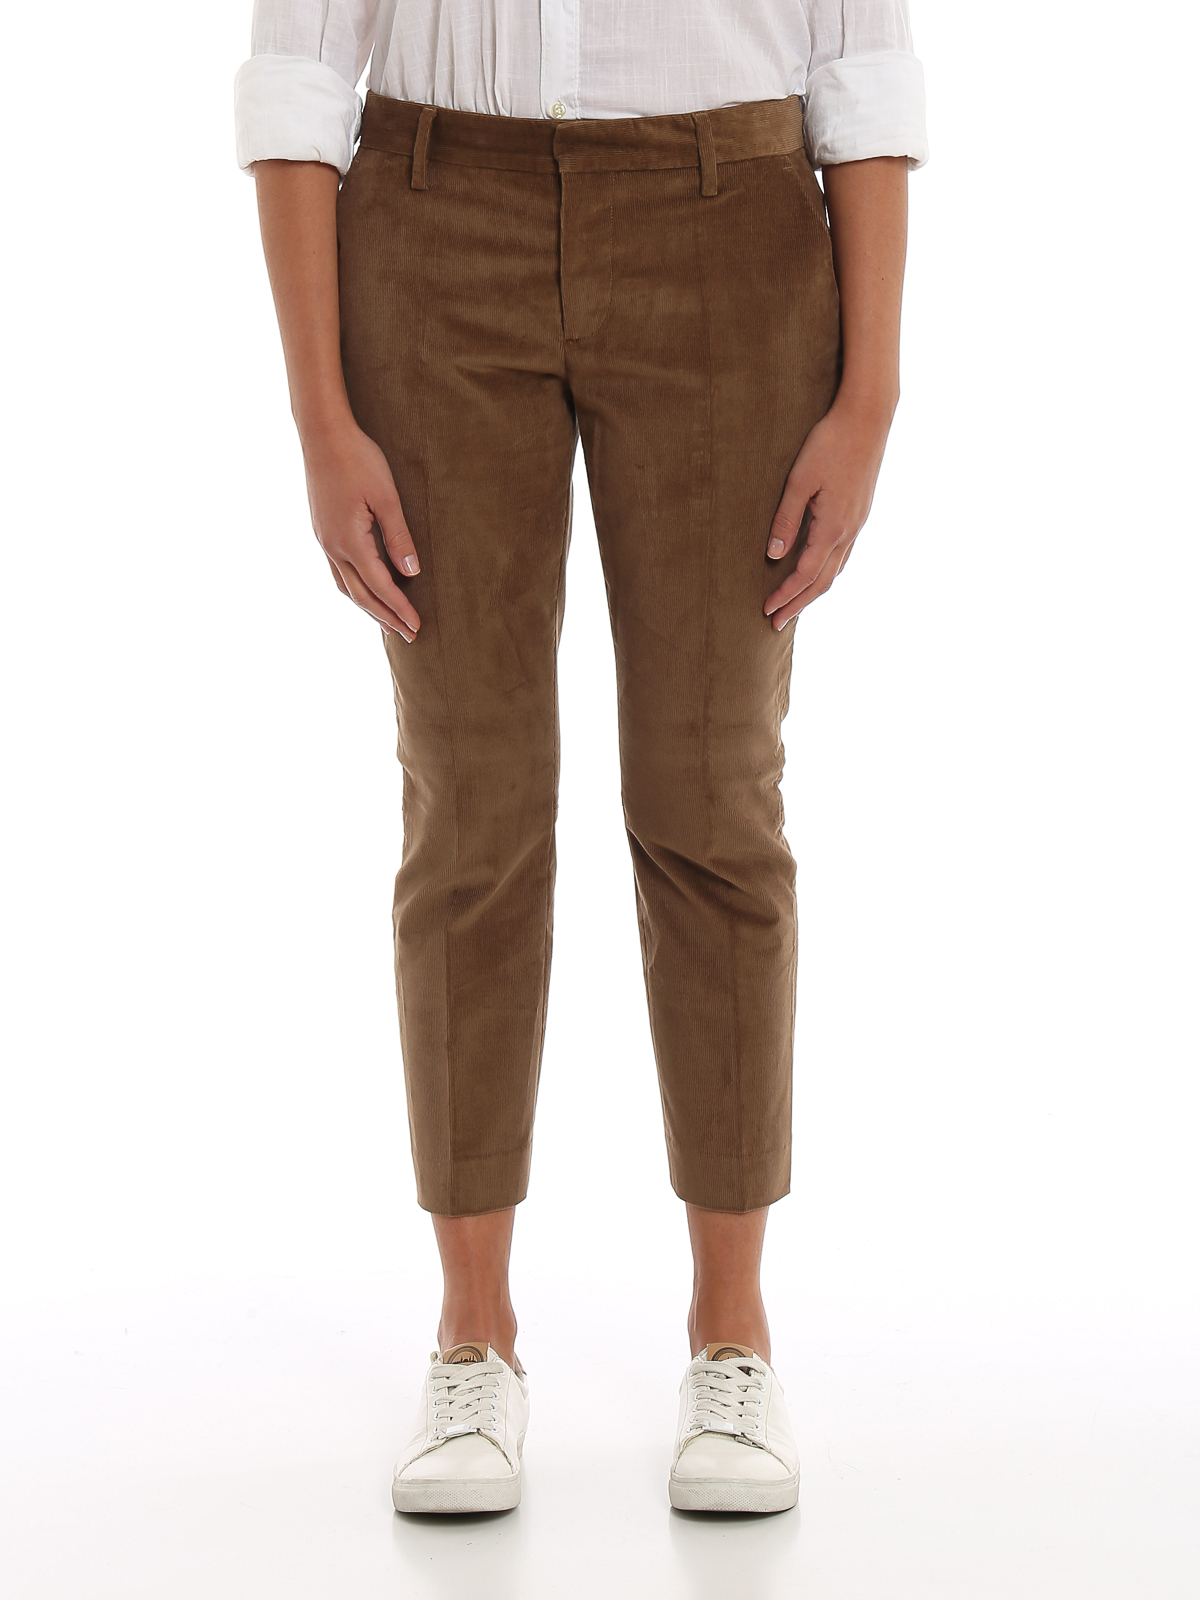 L'Appartement 【DSQUARED2】Corduroy Pants 【お気にいる】 51.0%OFF